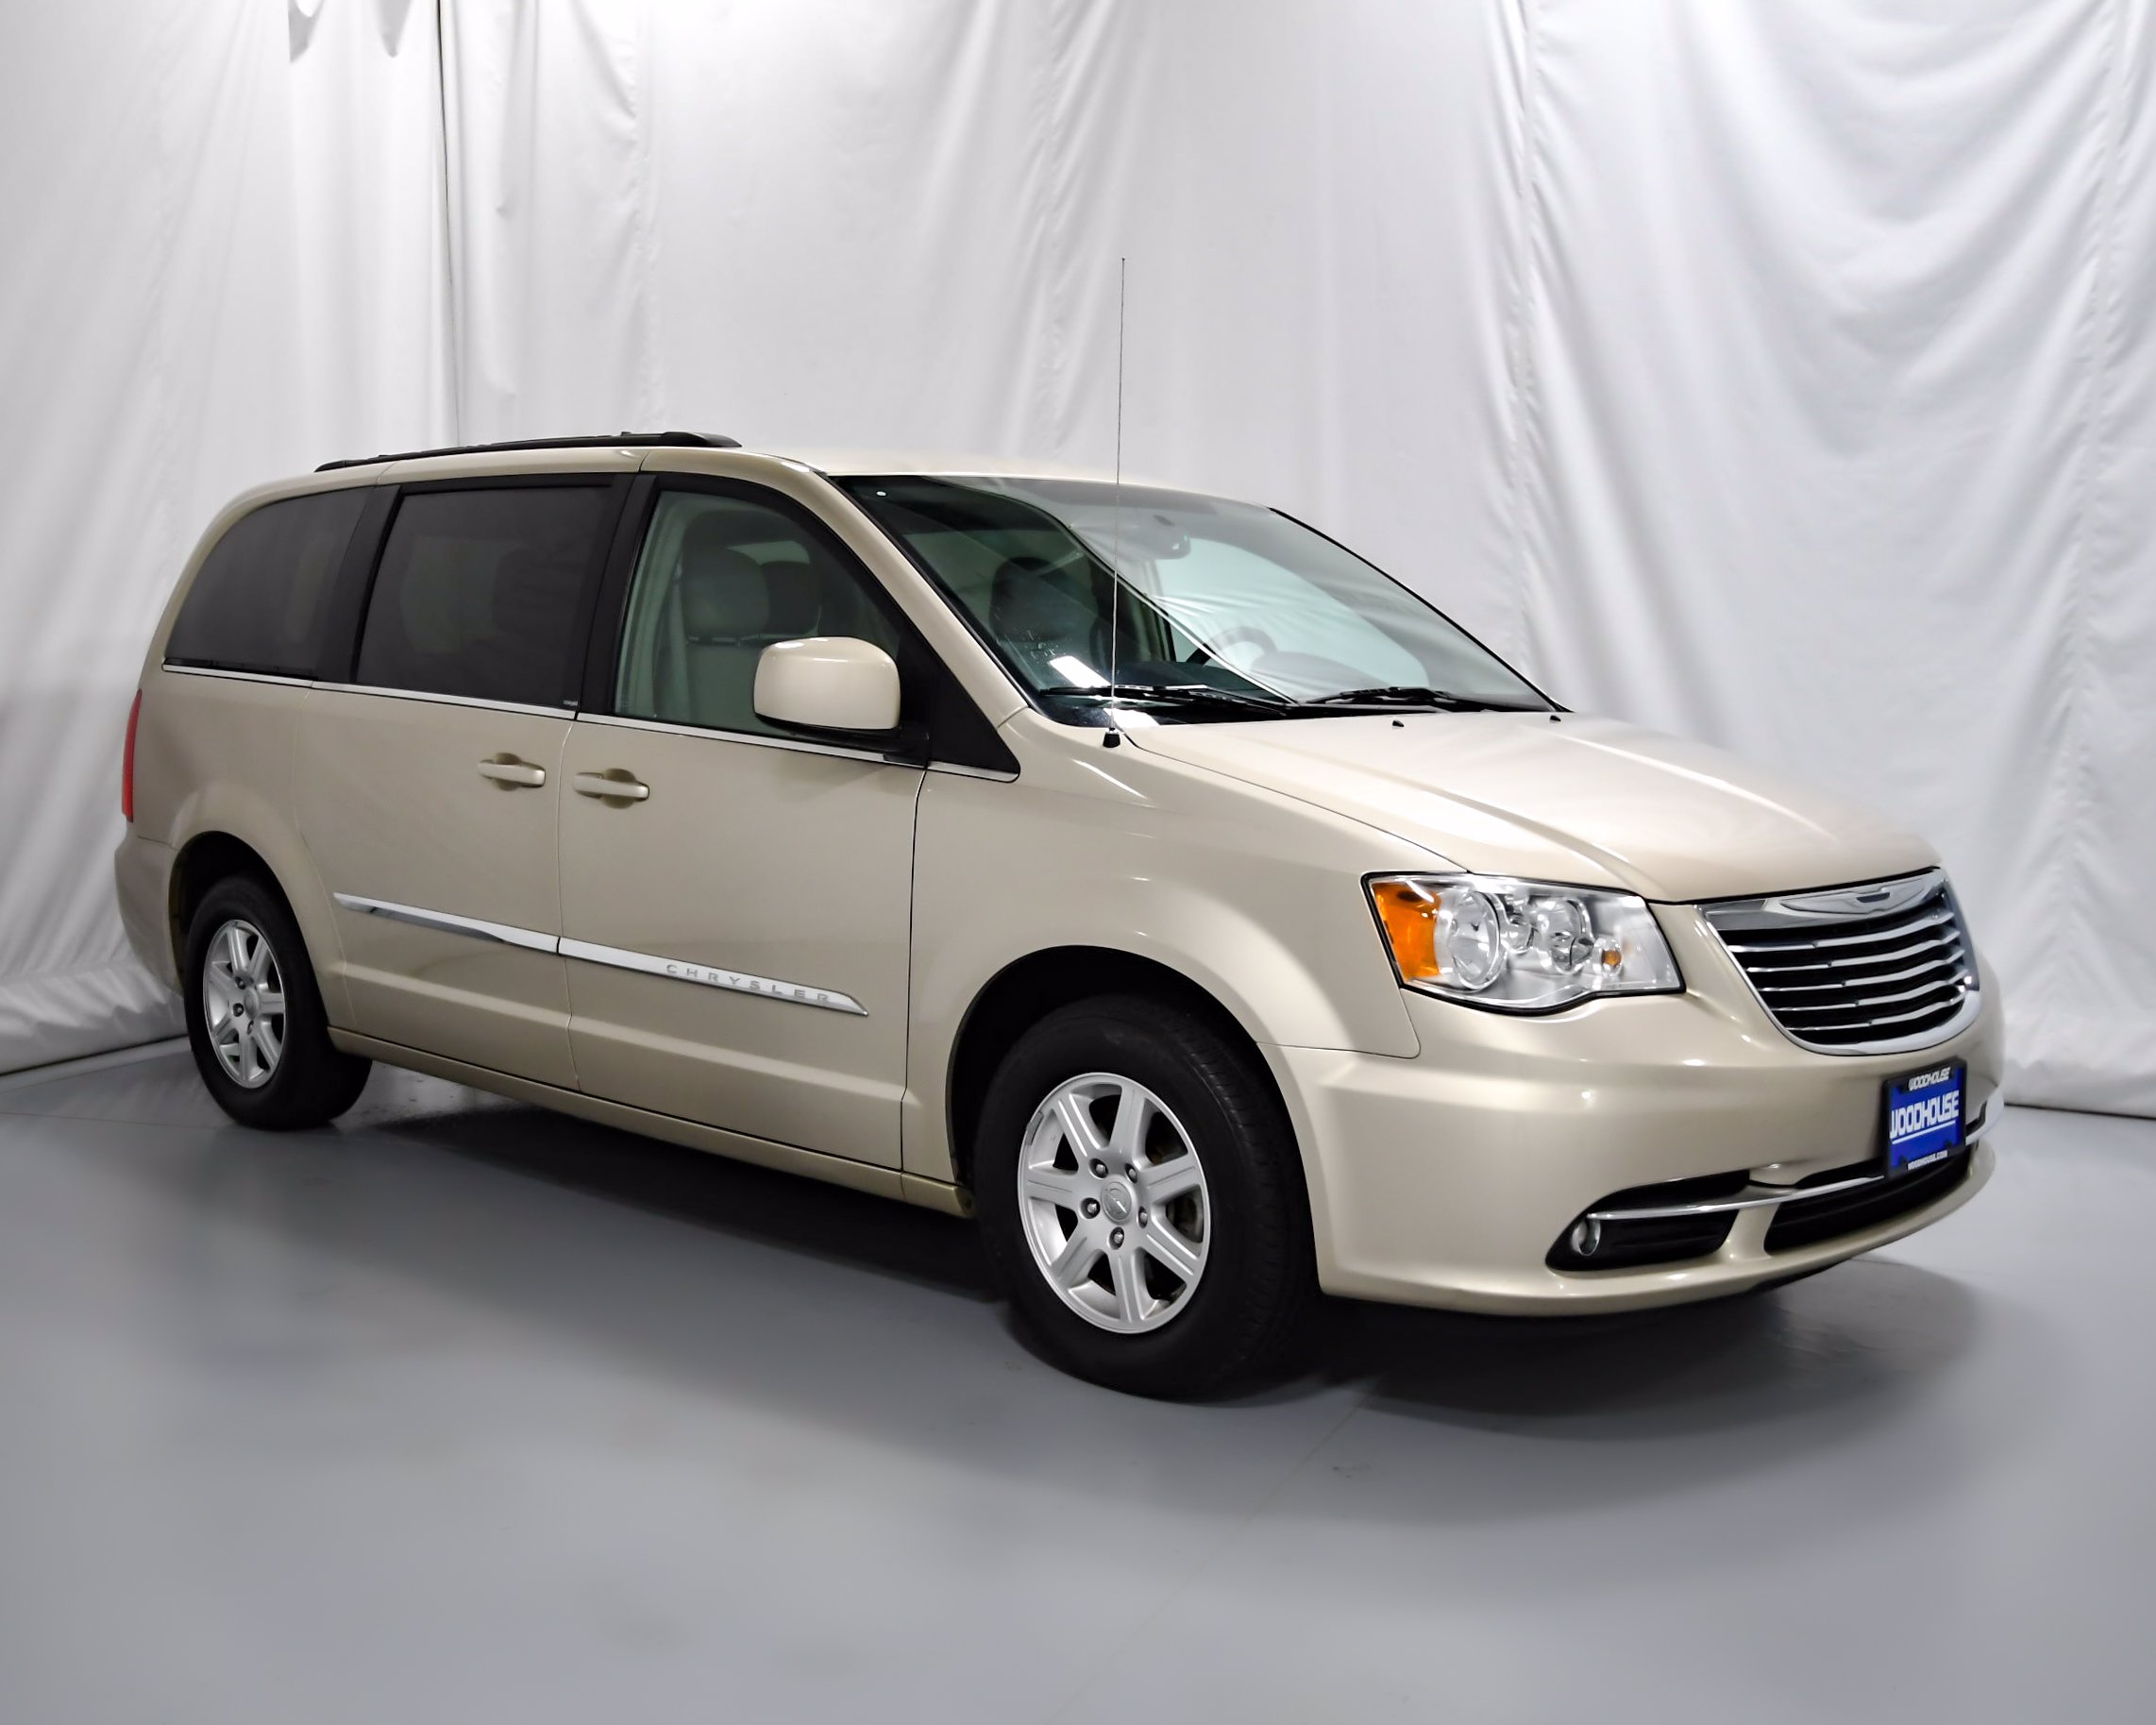 Pre-Owned 2013 Chrysler Town & Country Touring FWD Mini-van, Passenger Best Tires For Town And Country Van